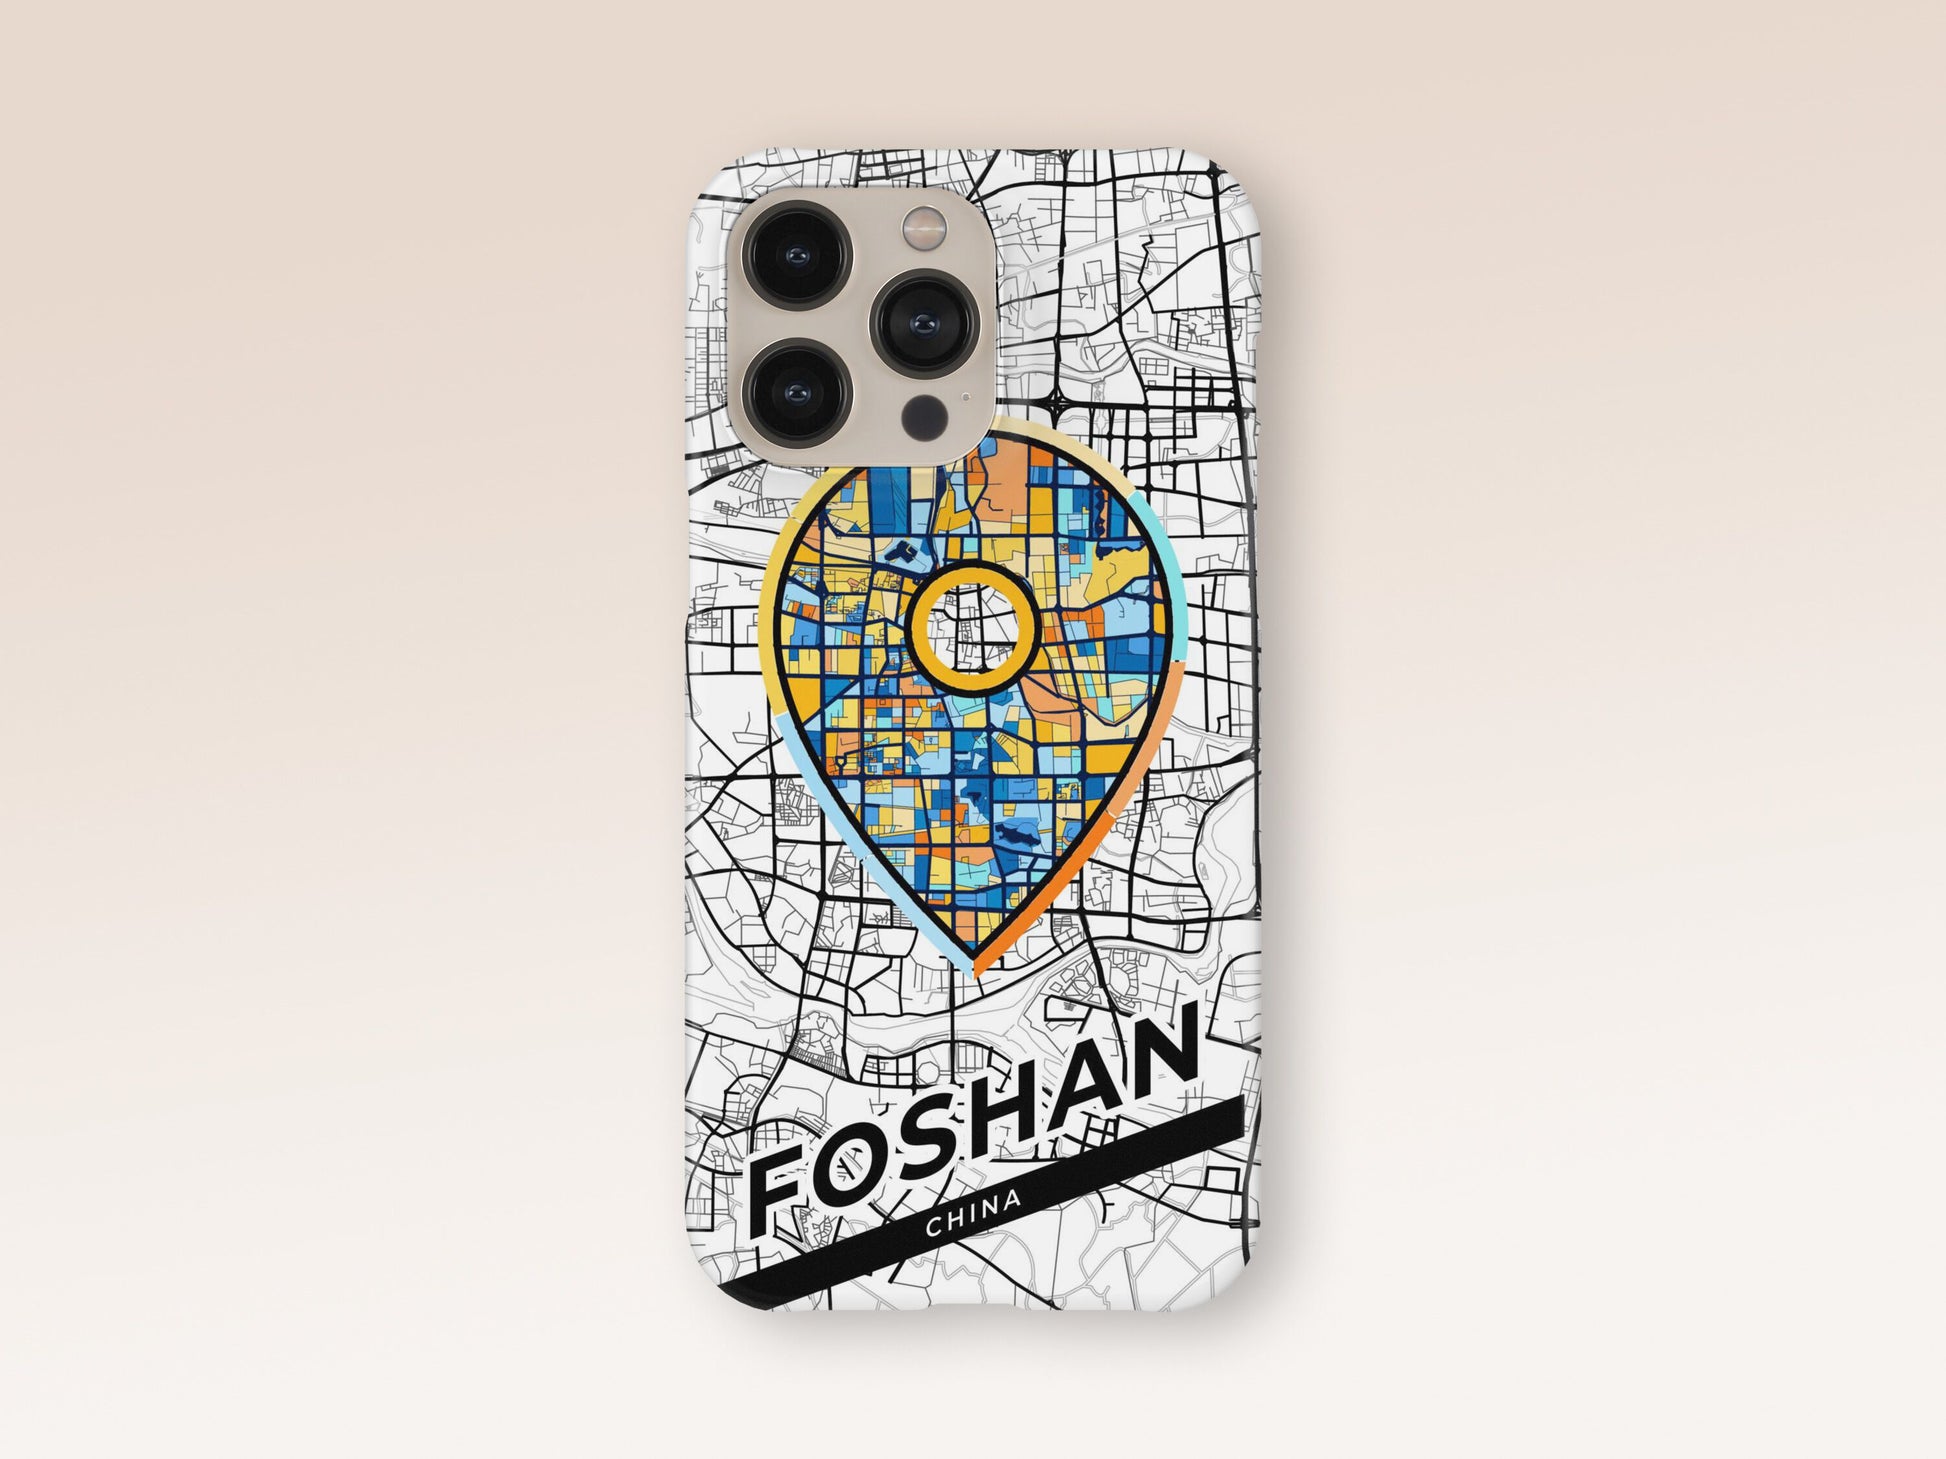 Foshan China slim phone case with colorful icon. Birthday, wedding or housewarming gift. Couple match cases. 1